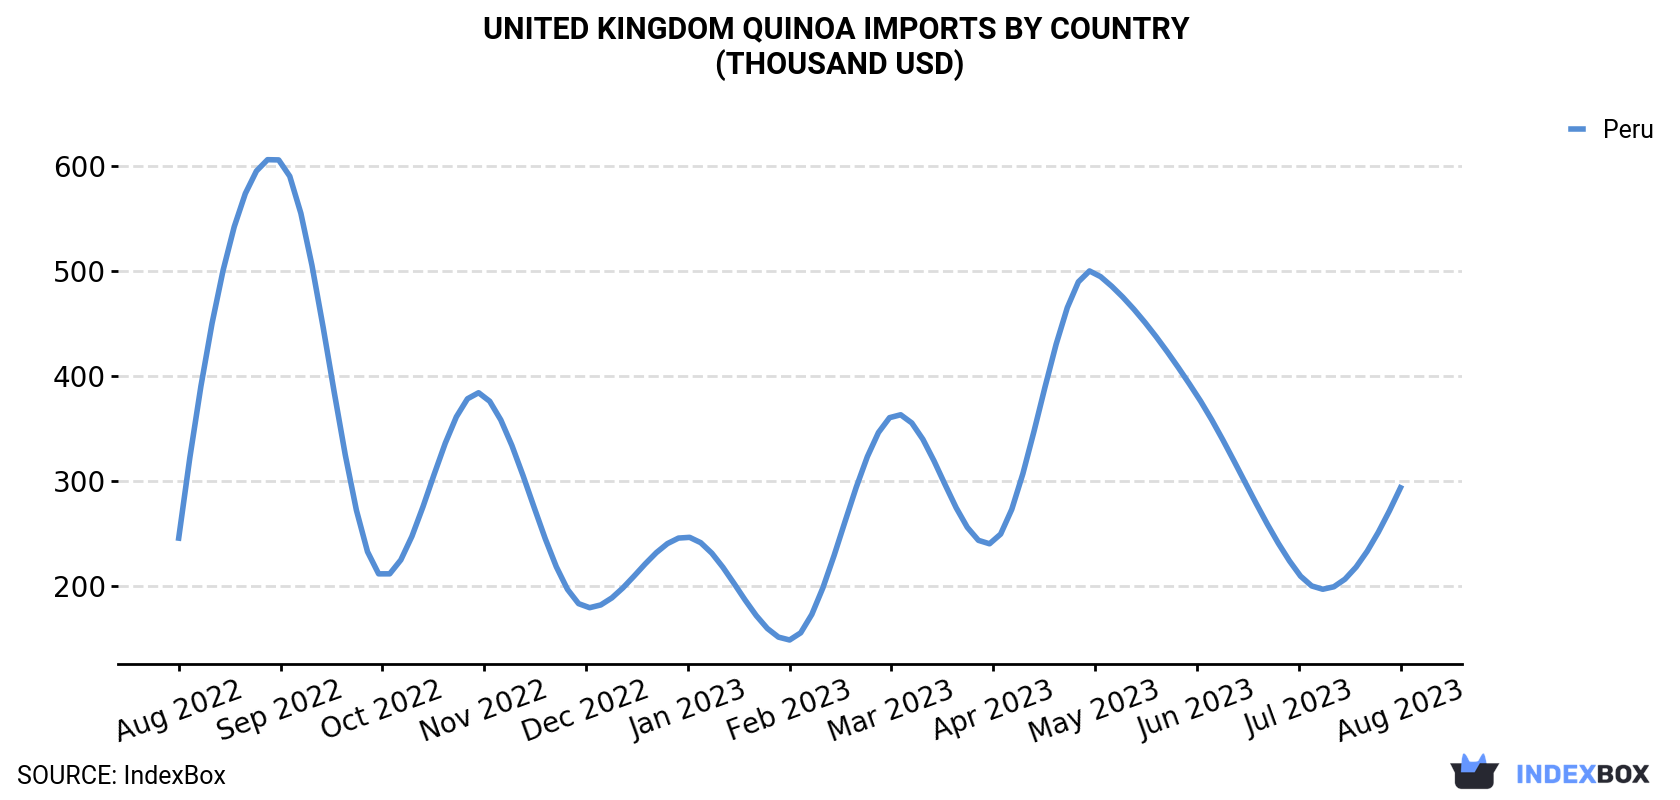 United Kingdom Quinoa Imports By Country (Thousand USD)